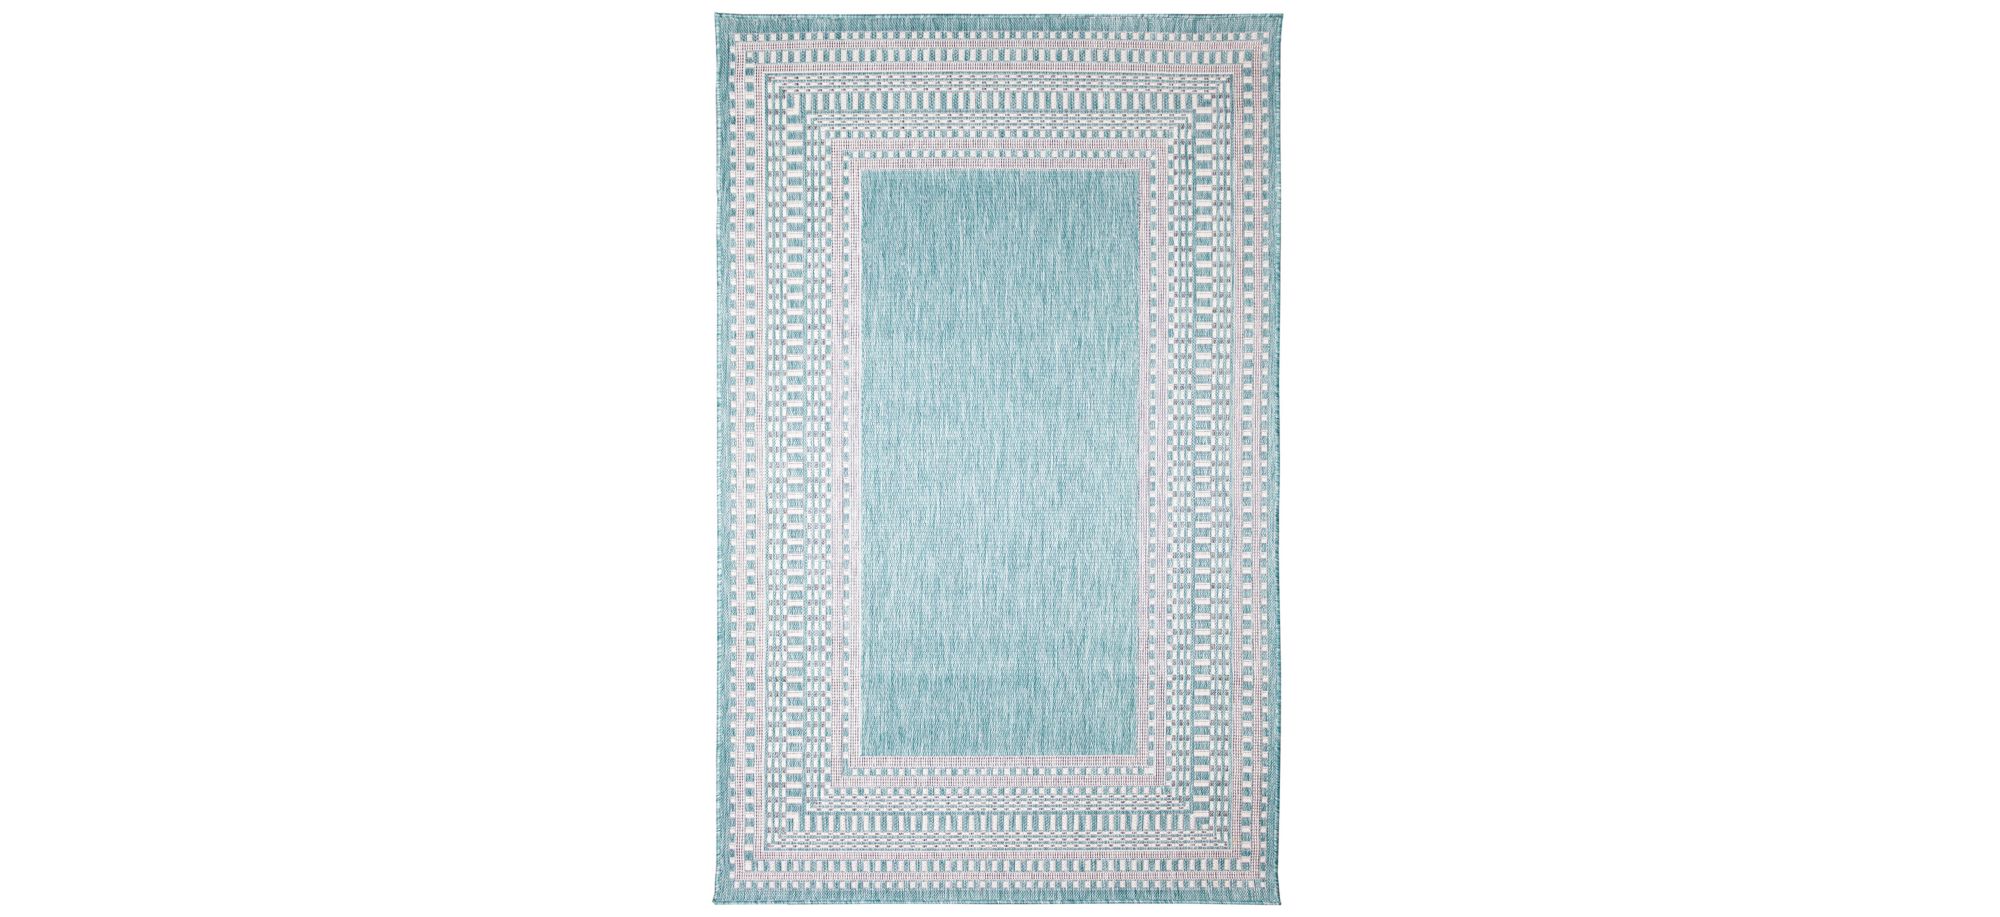 Liora Manne Malibu Etched Border Indoor/Outdoor Area Rug in Aqua by Trans-Ocean Import Co Inc